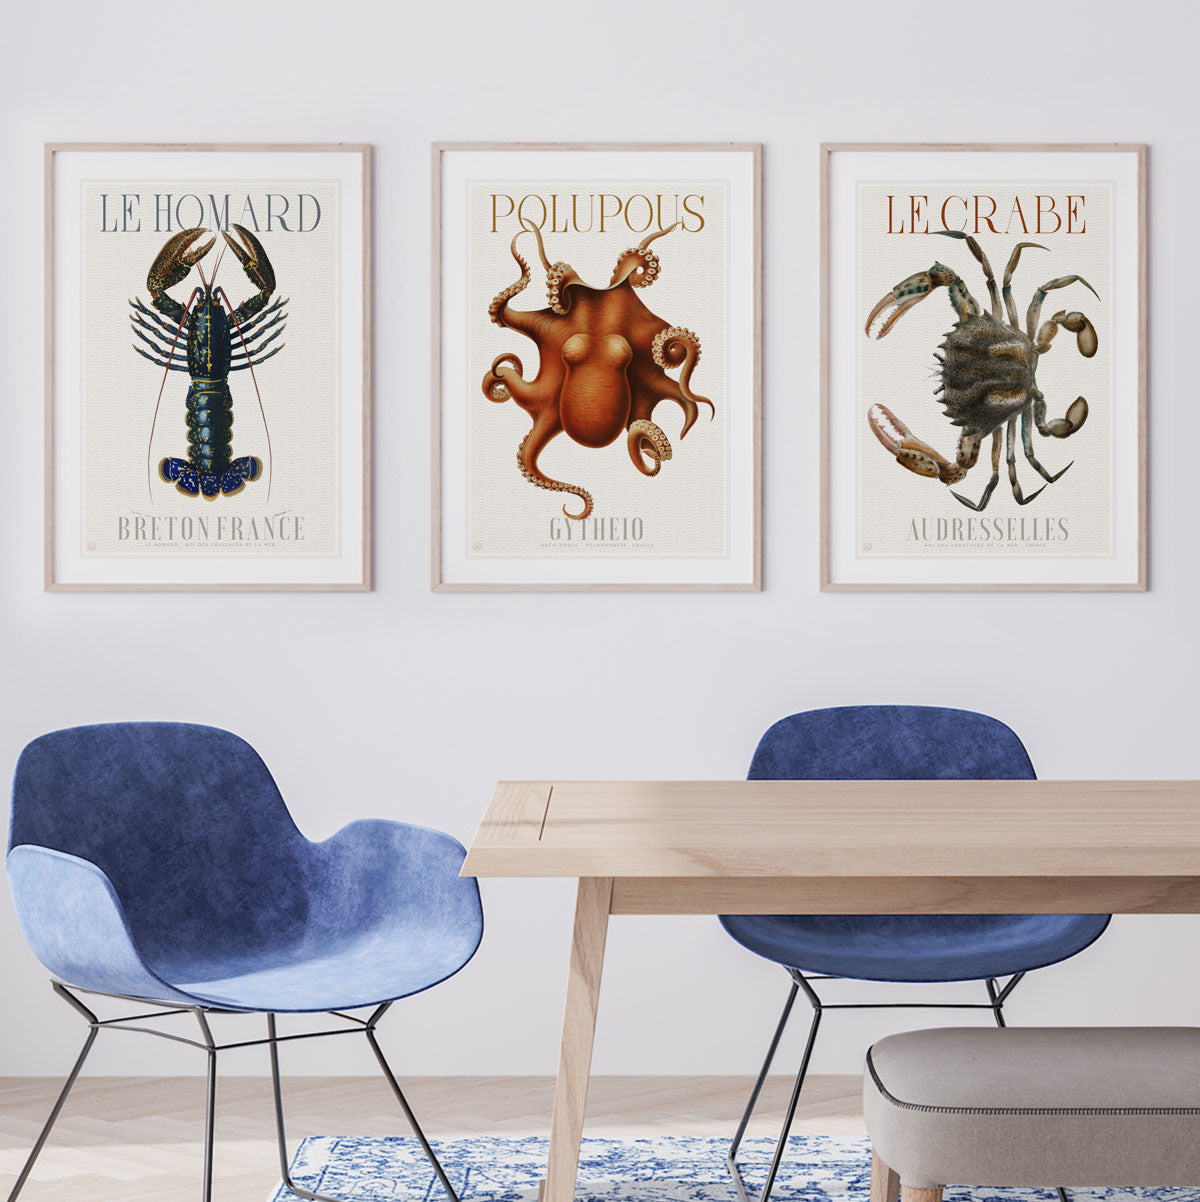 Greek Octopus retro vintage prints from Places We Luv